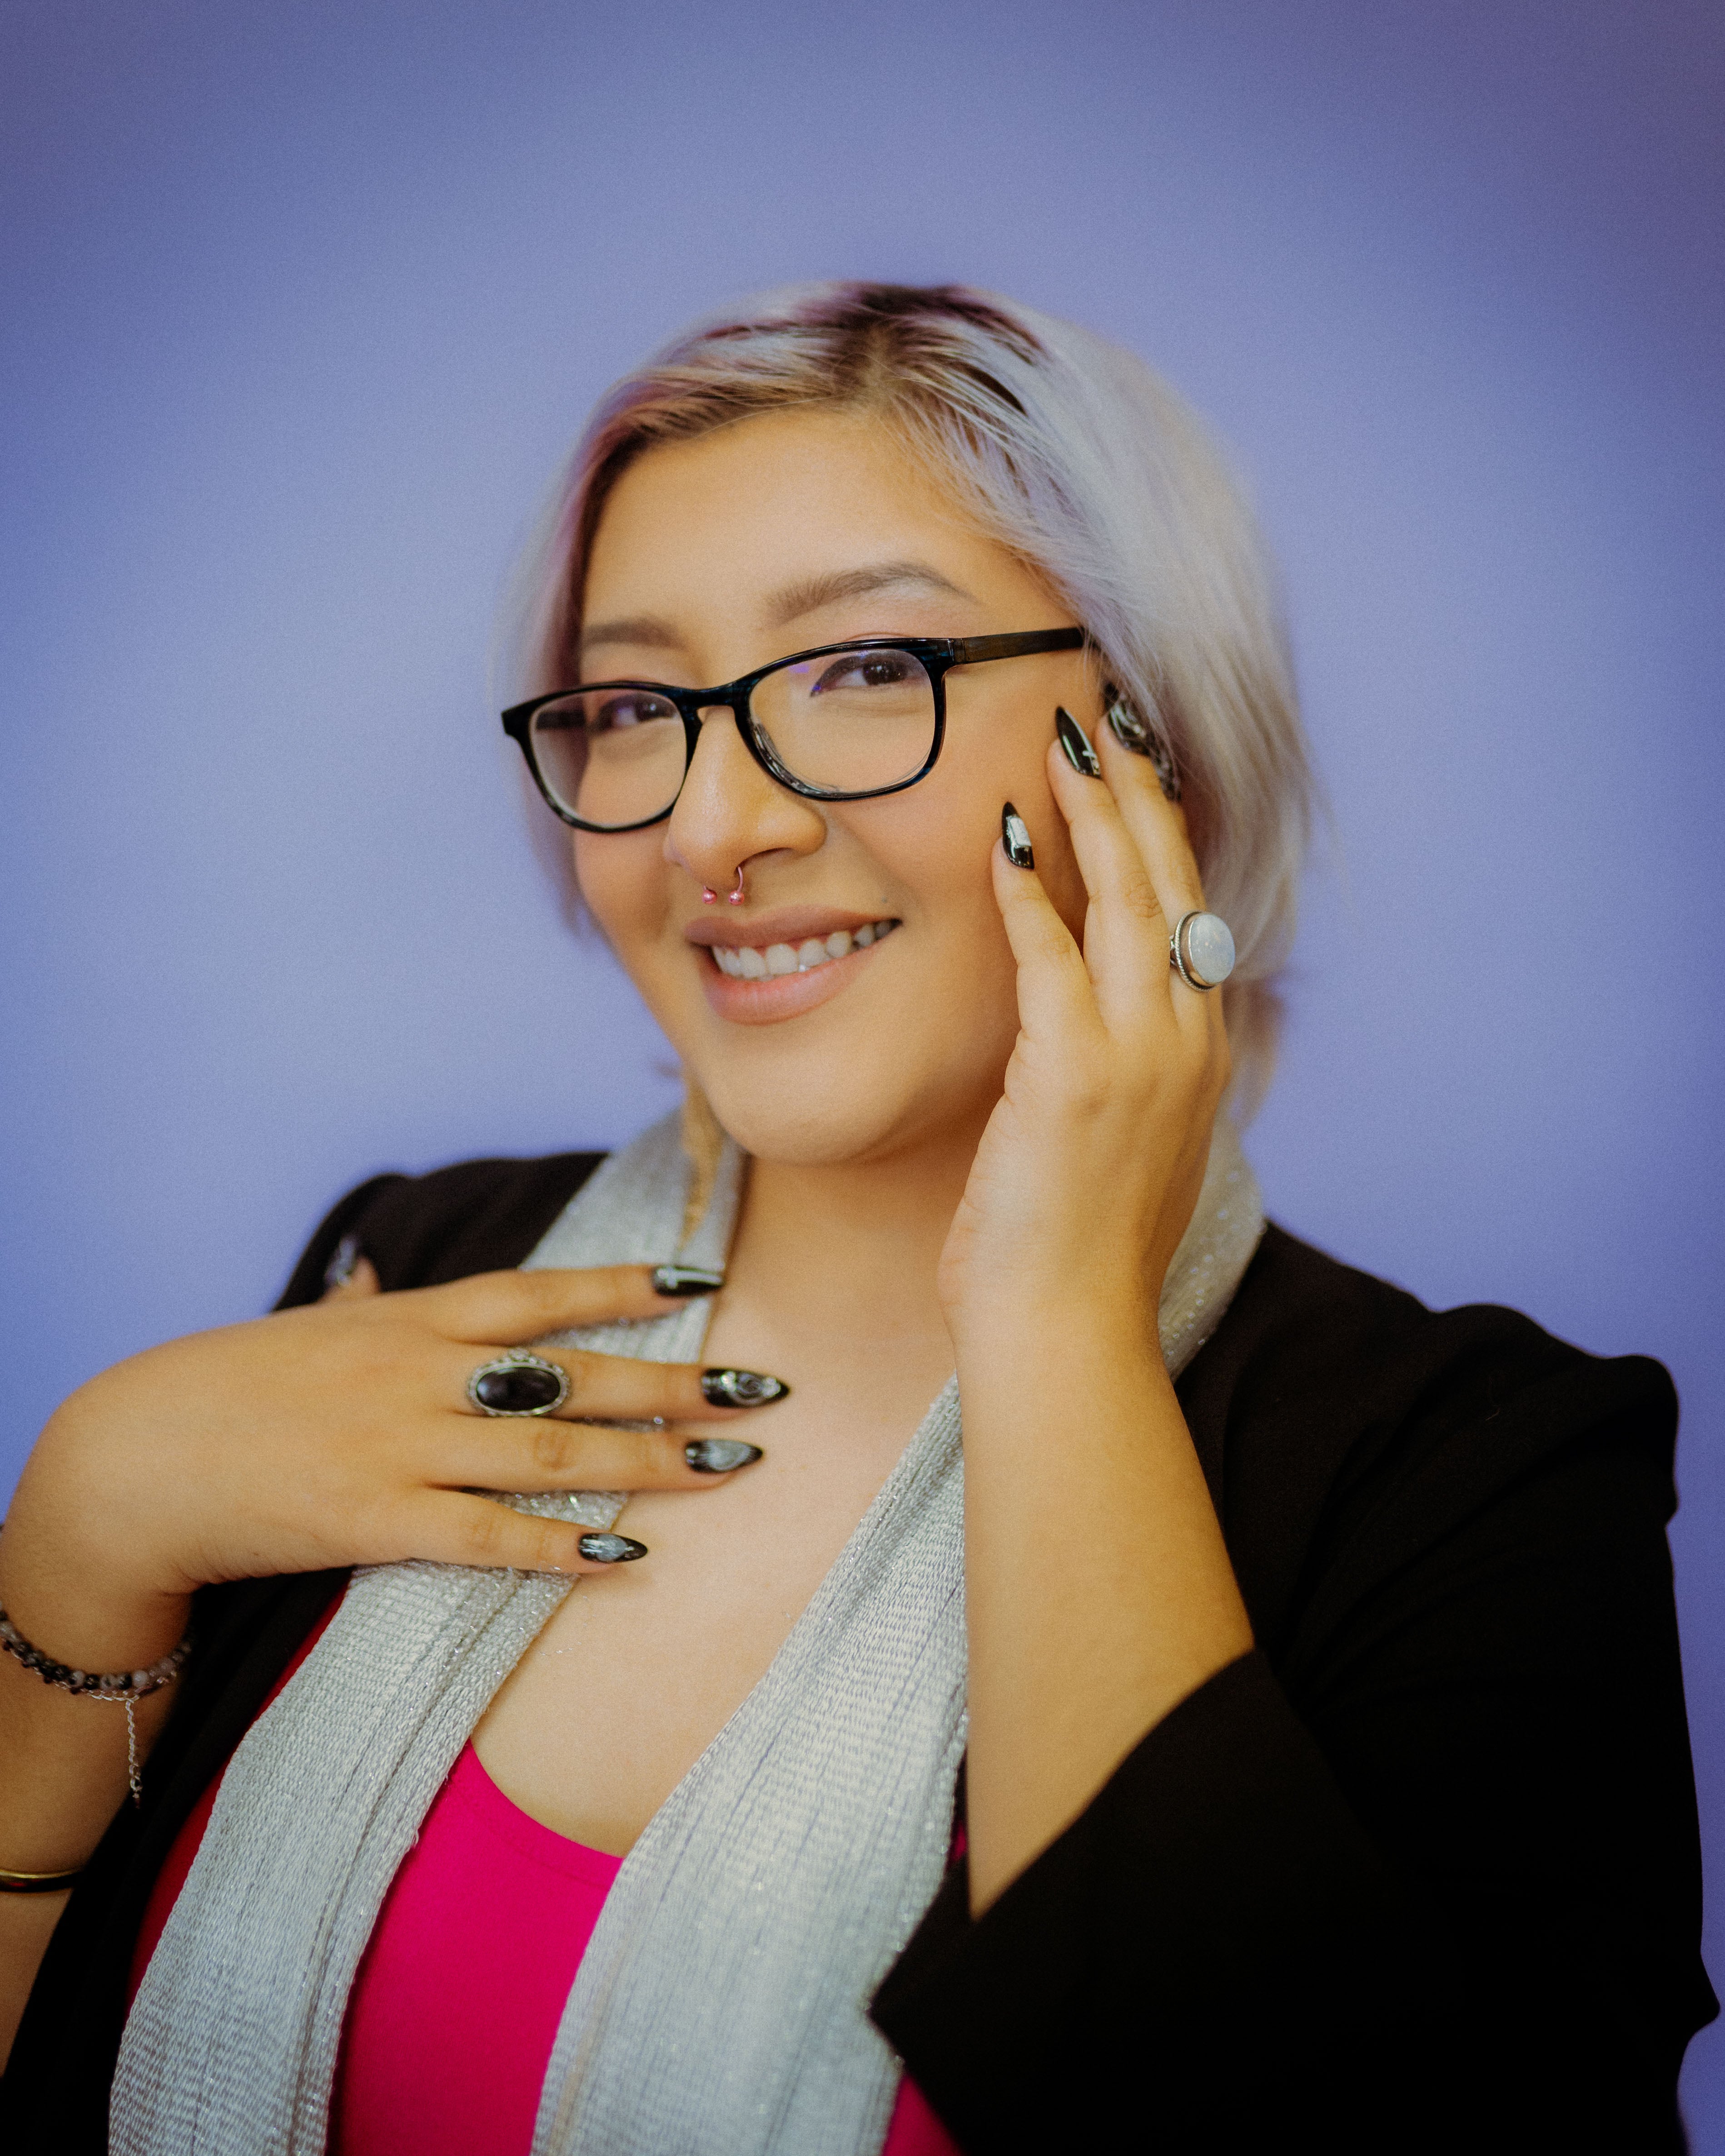 A portrait photo of nail artist Karina Hernandez showing off her new faux nails set, Mea Culpa, which are black and white with a gothic aesthetic